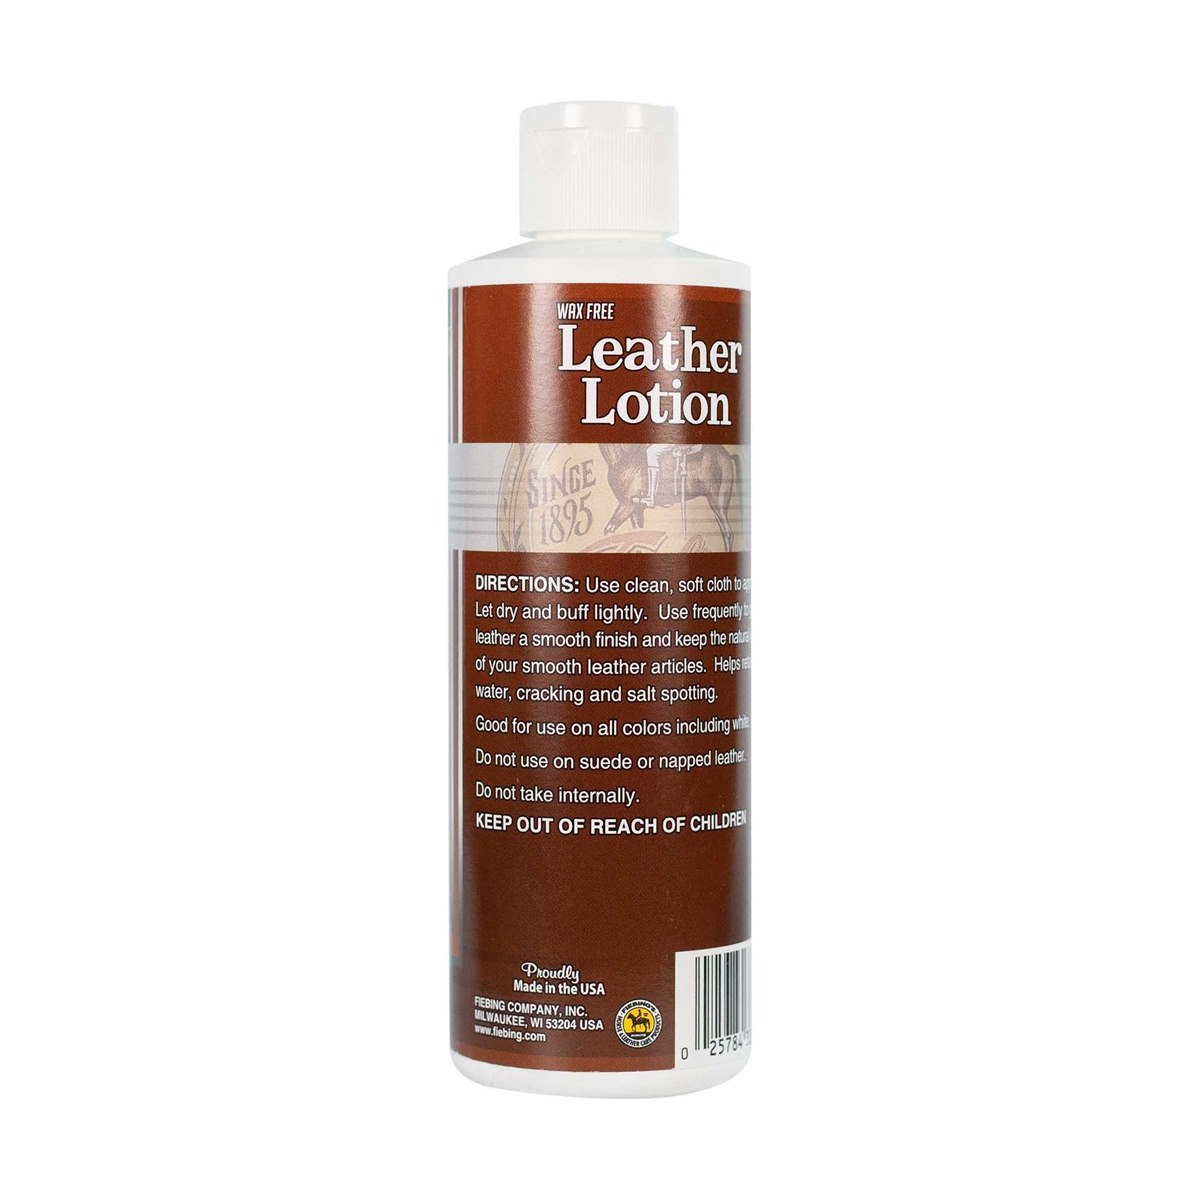 Fiebings Wax Free Leather-Lotion Usage Instructions